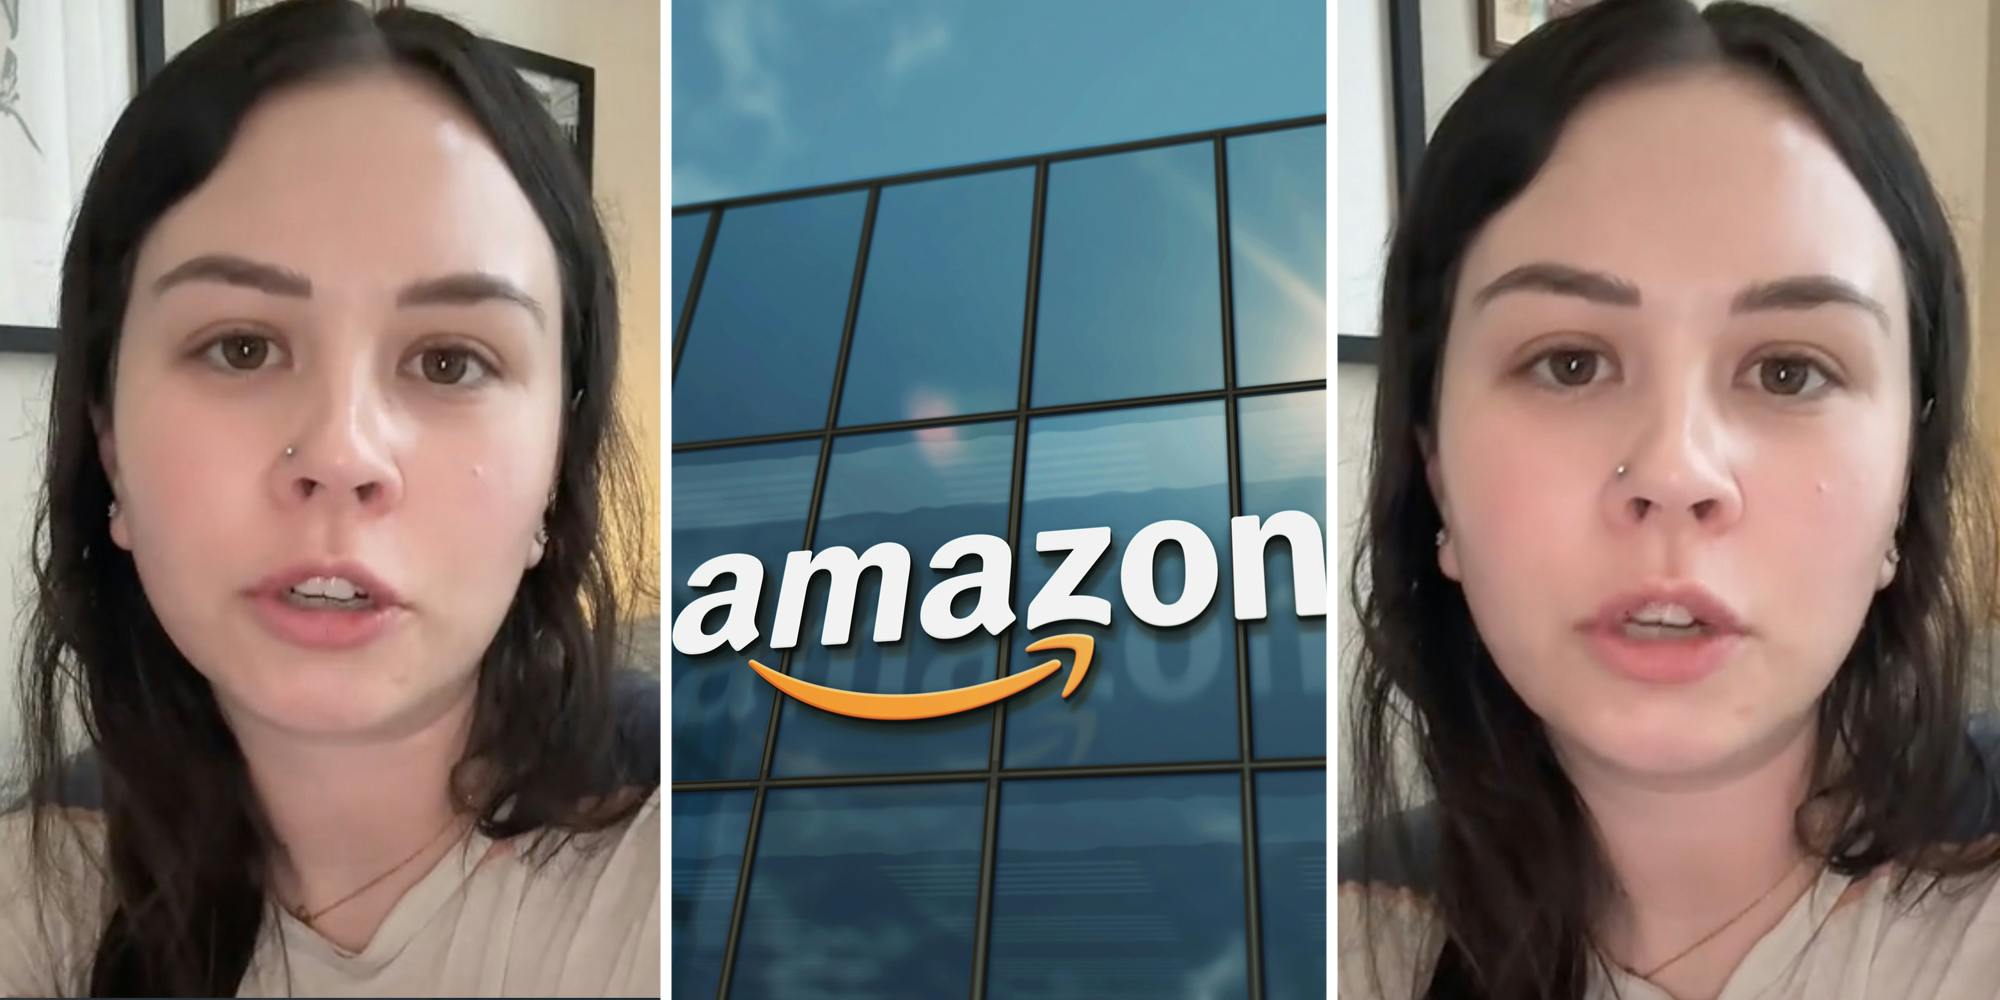 ‘I started to notice these 2 yellow dots around the corner of my eye’: Woman issues warning after buying Amazon sunglasses